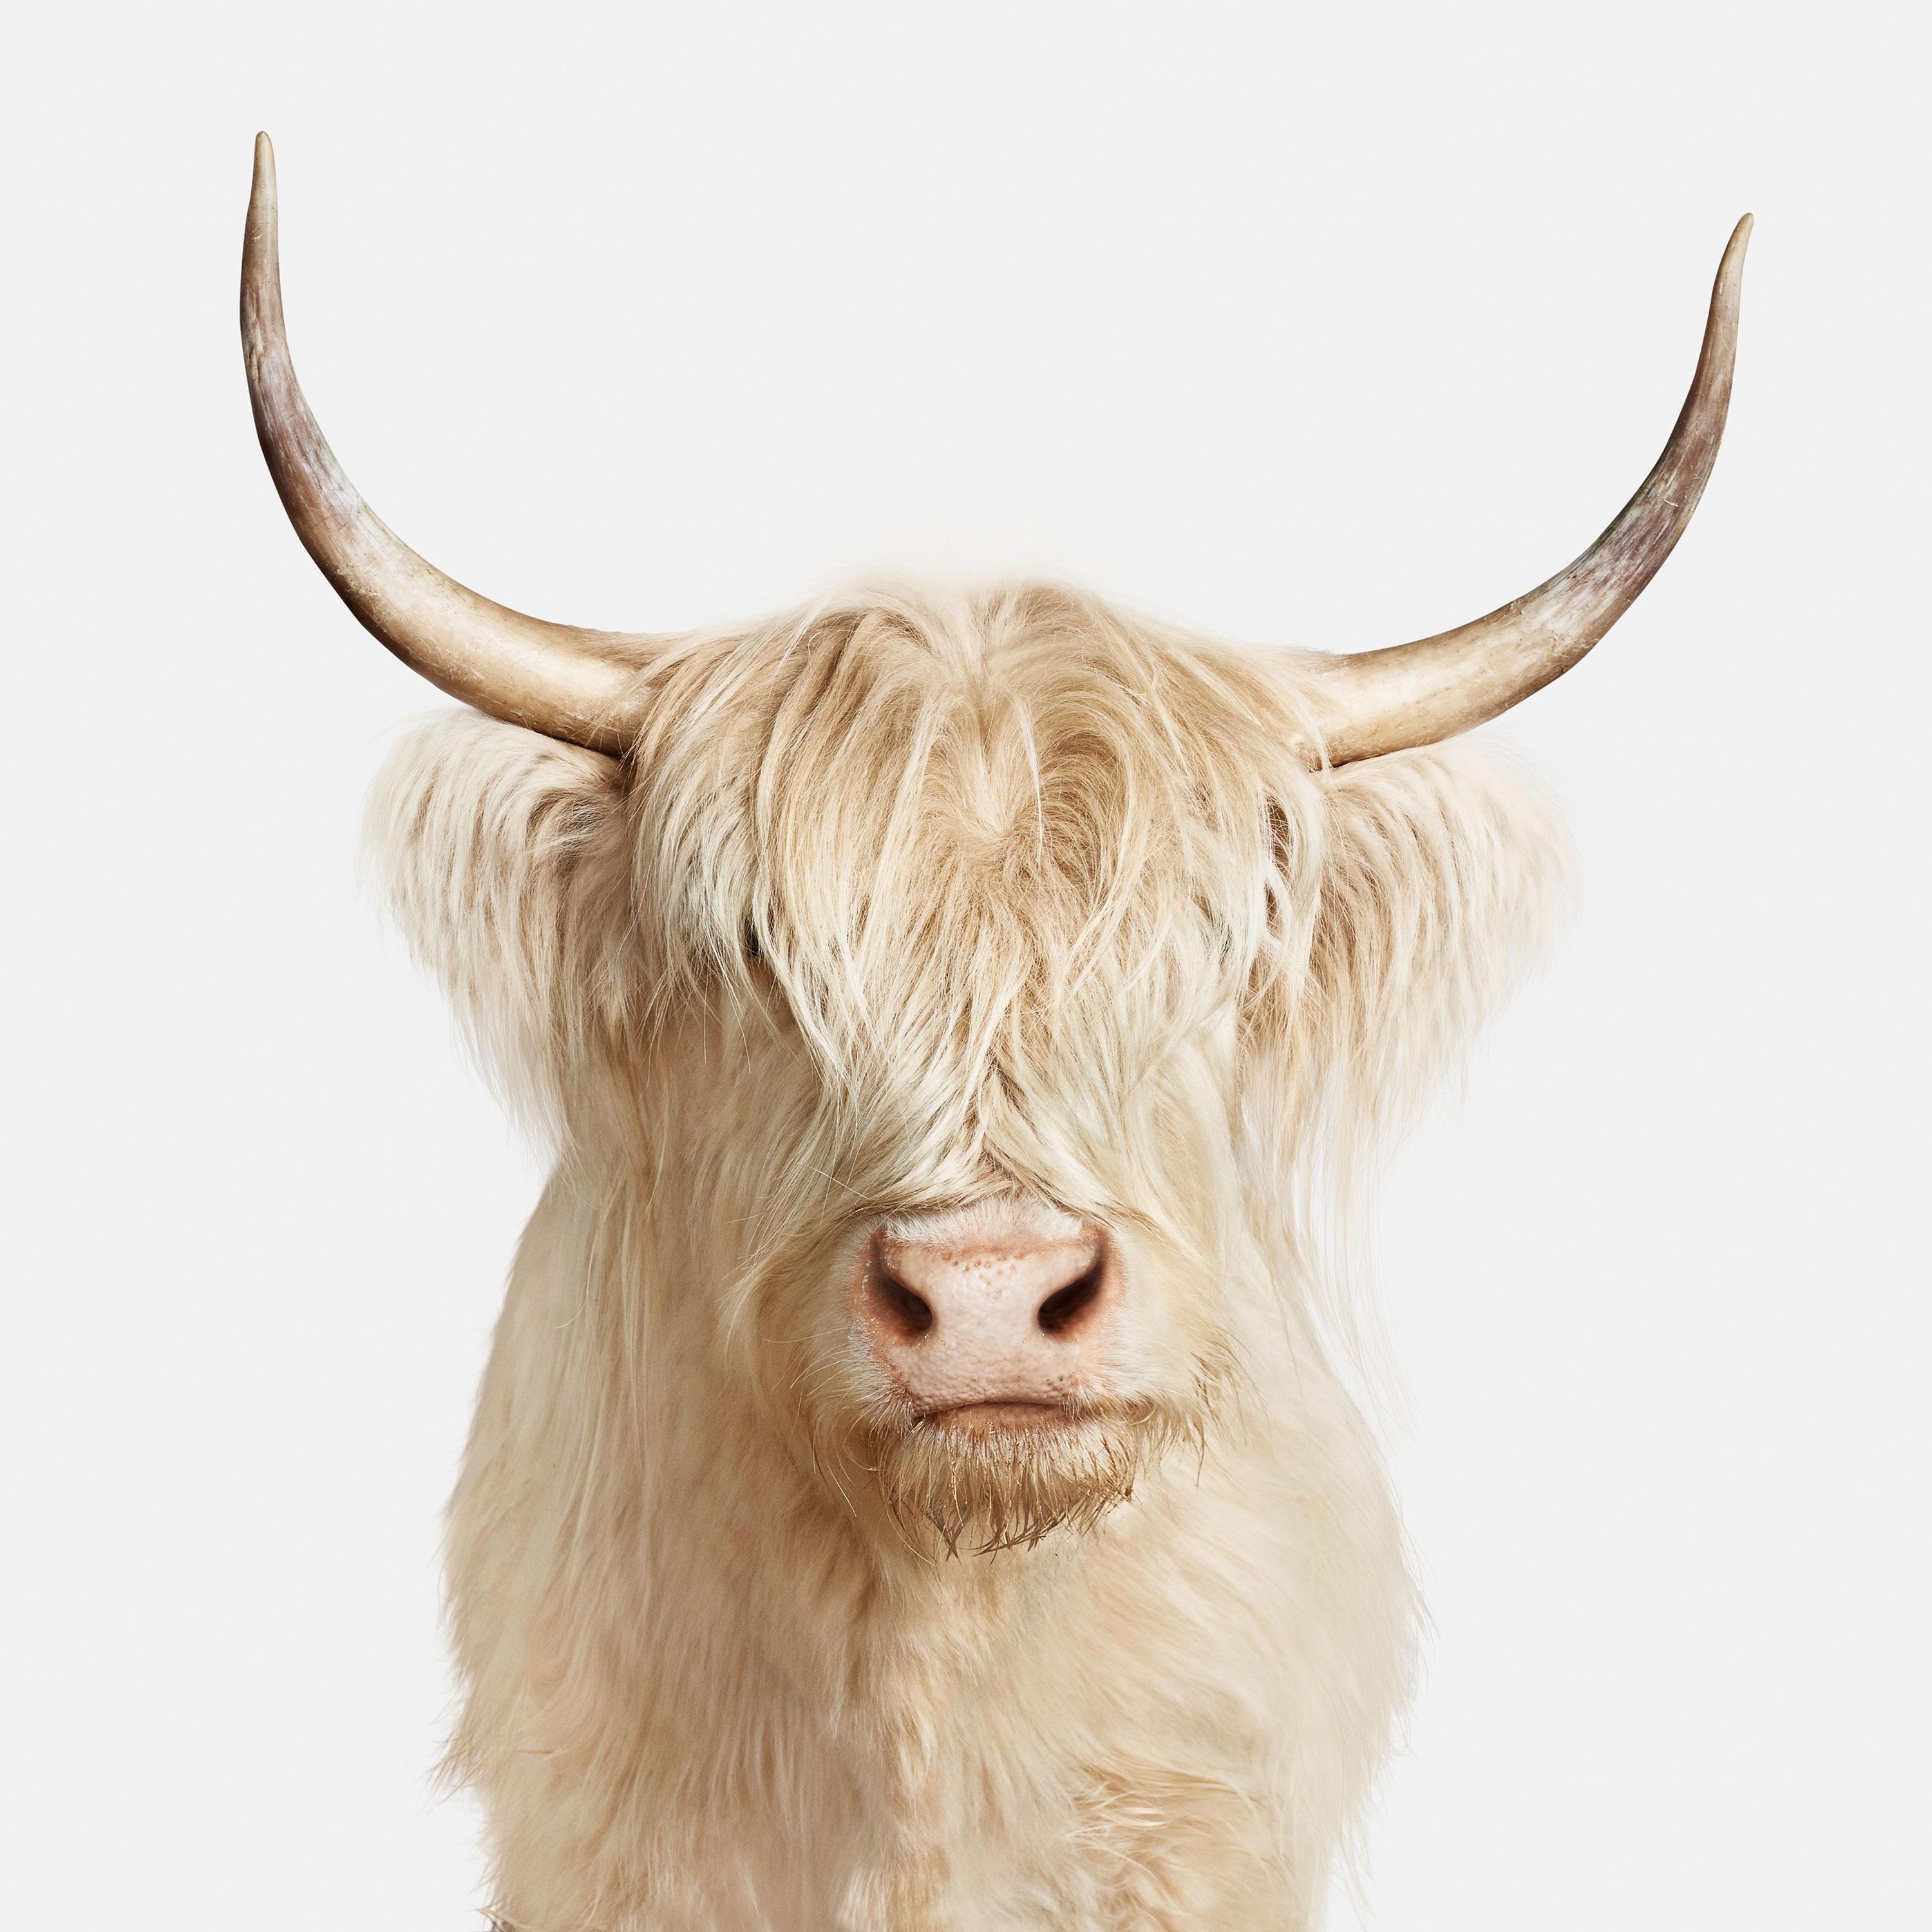 Randal Ford Color Photograph - Highland Cow No. 1 (40" x 40")